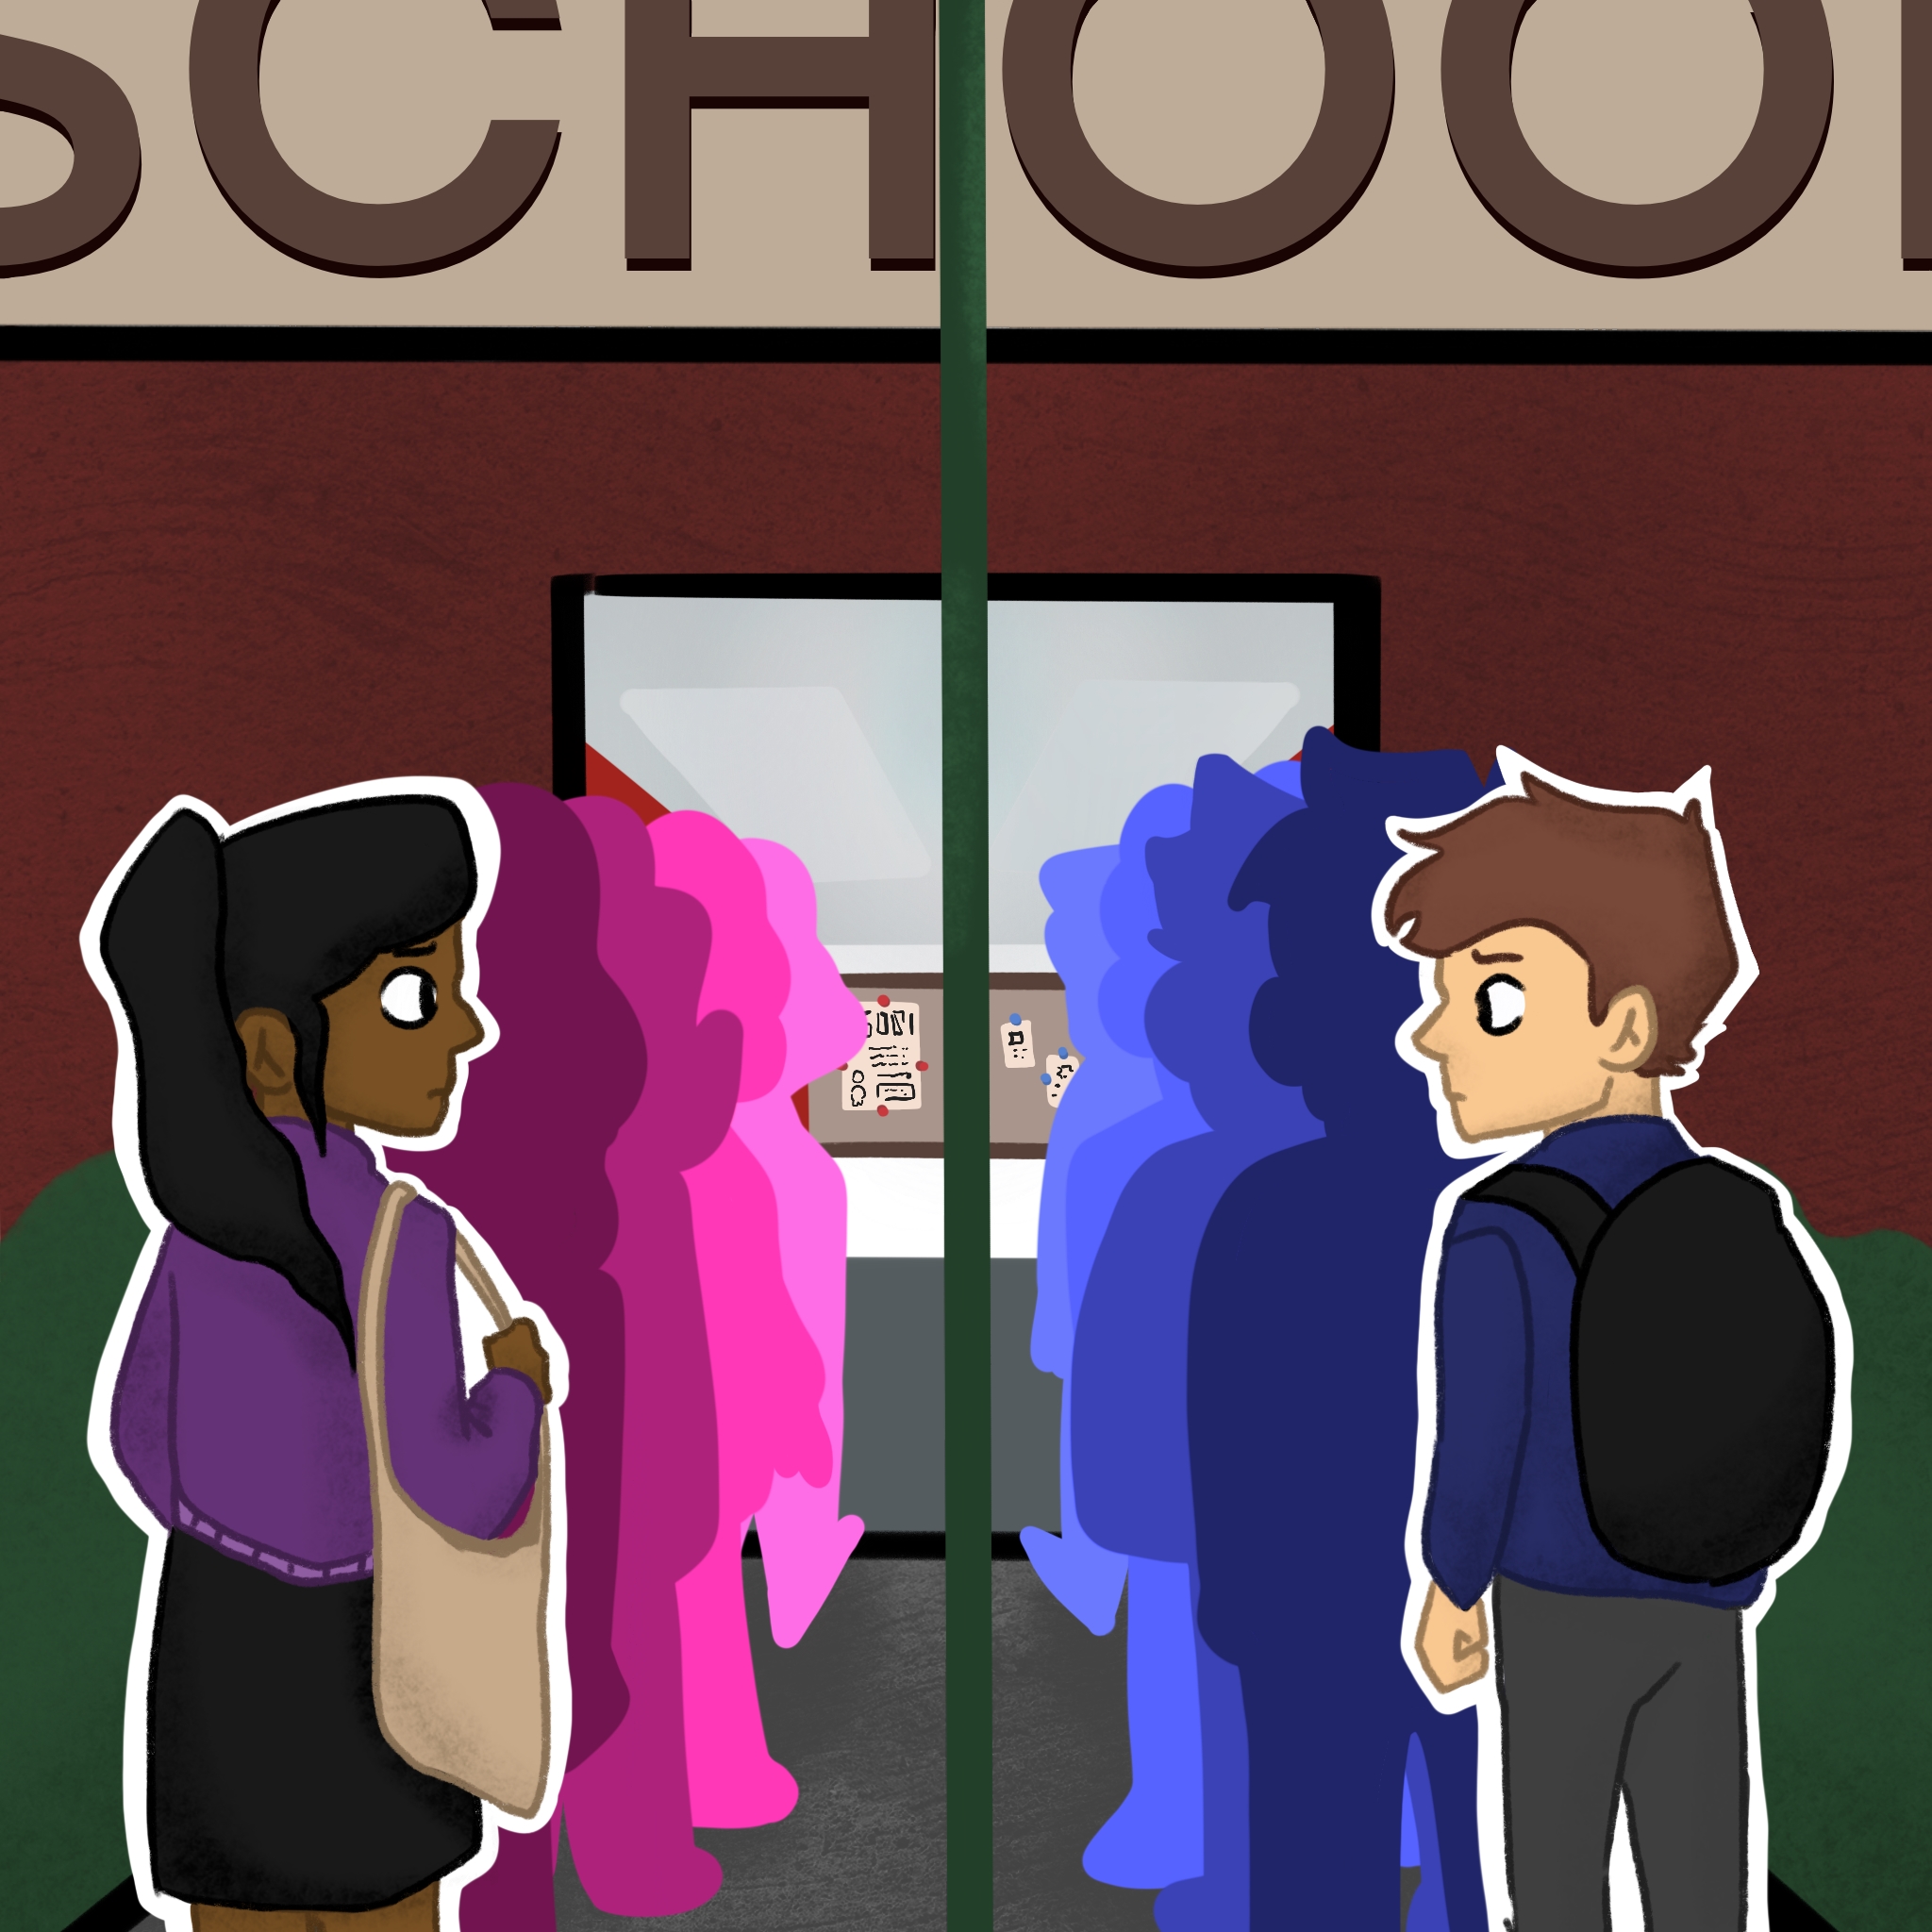 for tomorrow's article! A digital illustration of a fem person and a masc person looking at each other from the ends of two separate lines. One line is composed of fem people's pink silhouettes, and the other is composed of masc people's blue silhouettes. The fem person has brown skin, black hair in a ponytail, a purple shirt, and a tan bag. The masc person has white skin, short brown hair, a blue shirt, and a black backpack. He looks worried. They are in a school setting approaching a bulletin board with various flyers on it.